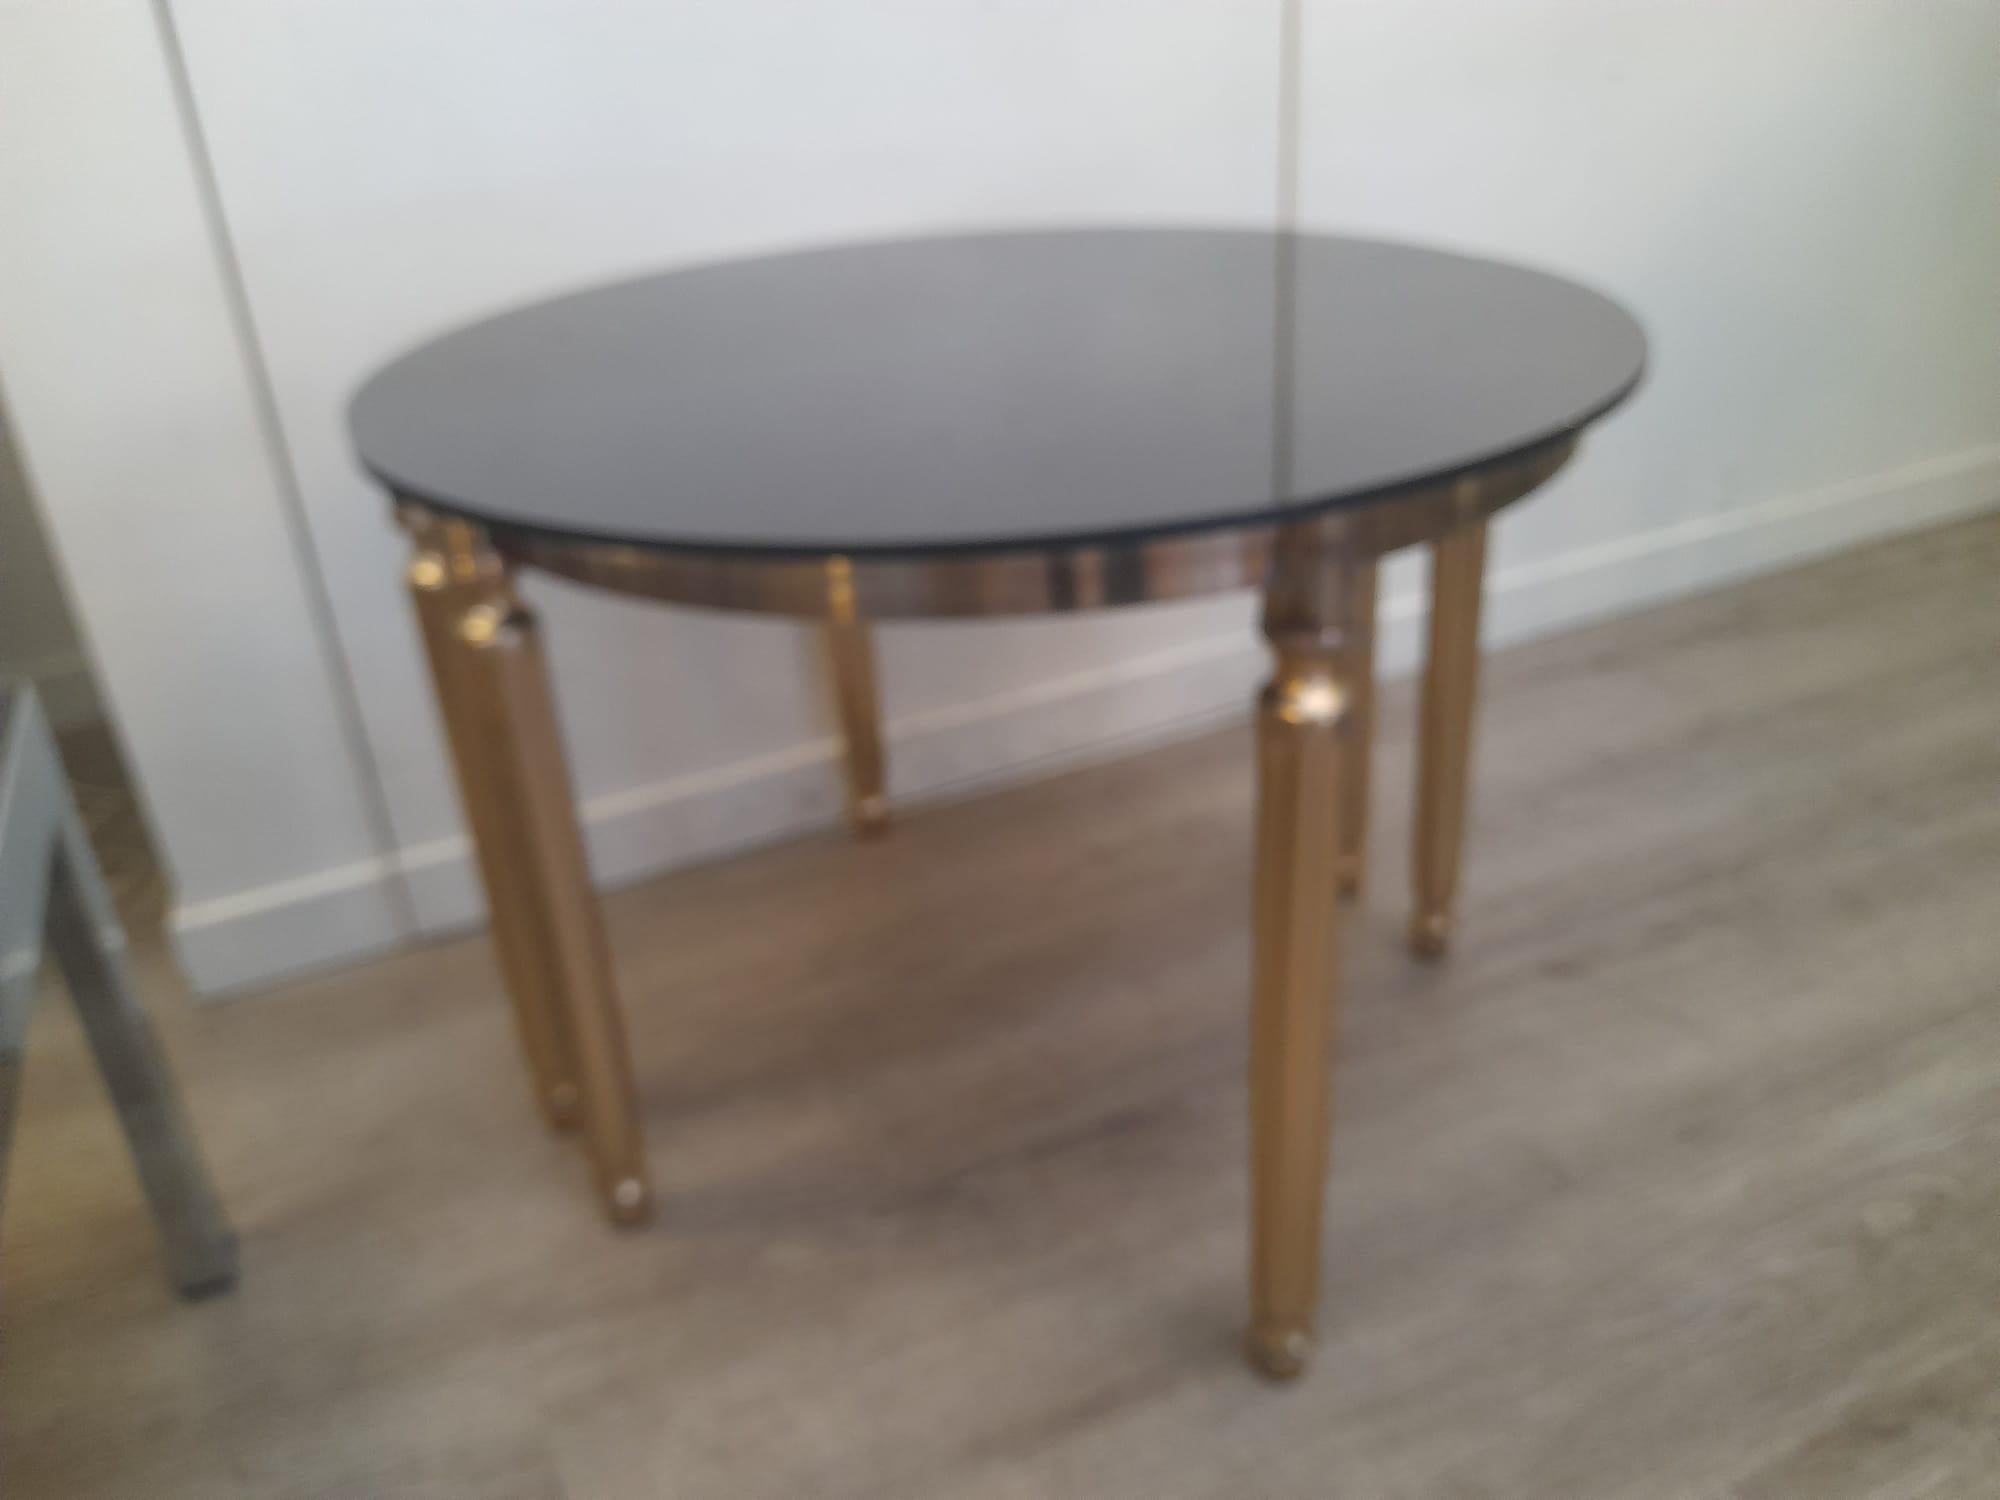 1970s Demi-lune golden metal smoked glasses small tables.

These identical tables can be put together to form a rounded only table.
They have golden metal structure showing some wears coherent with age and use (see pictures as a part of